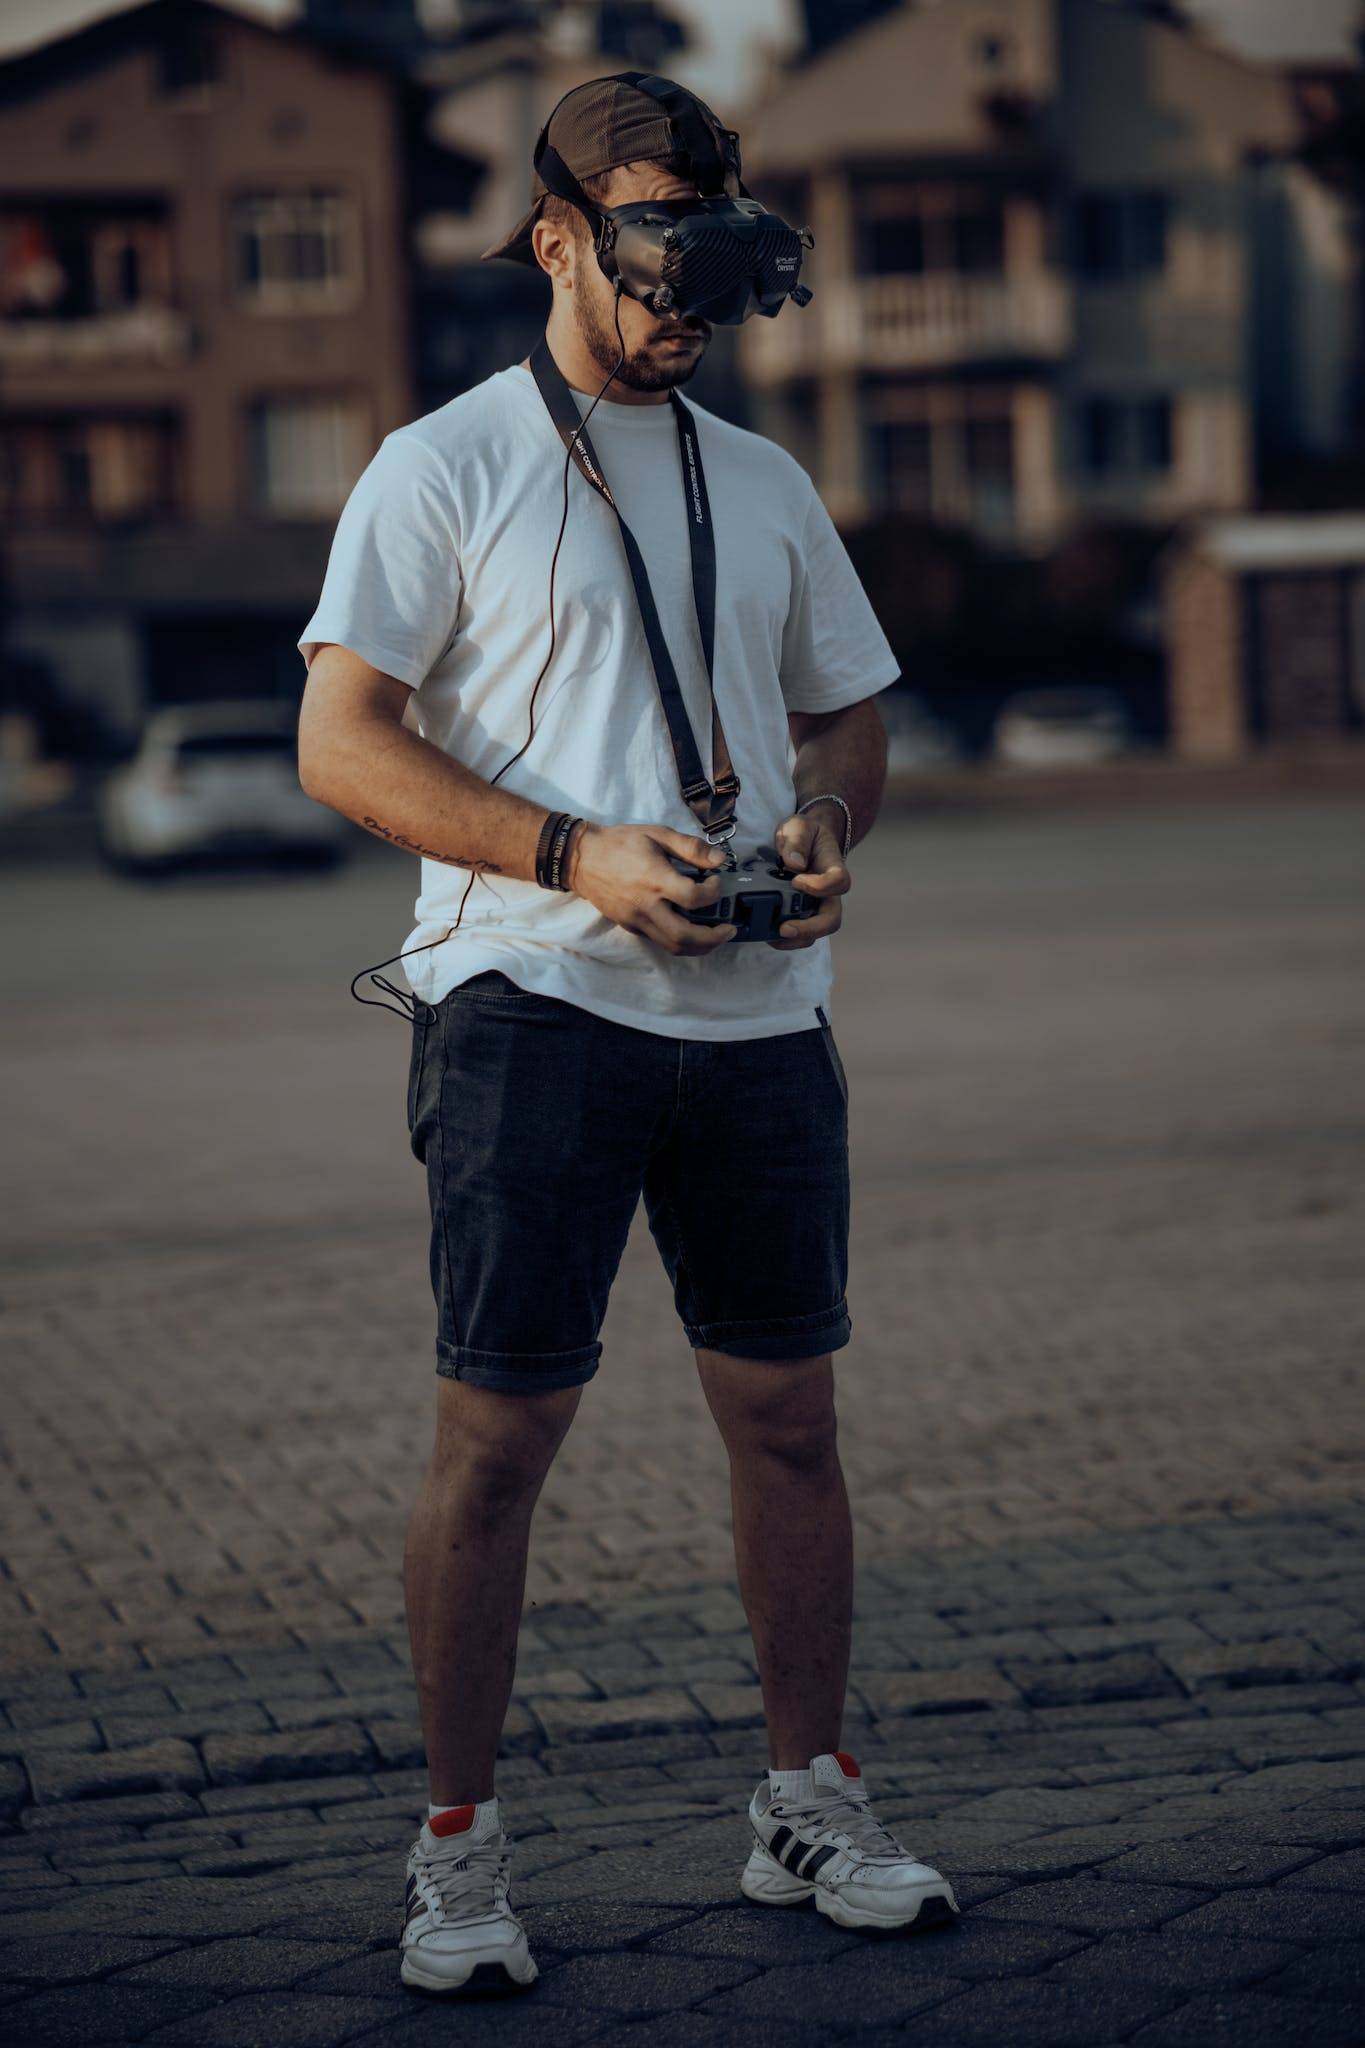 A man with a camera and a white shirt